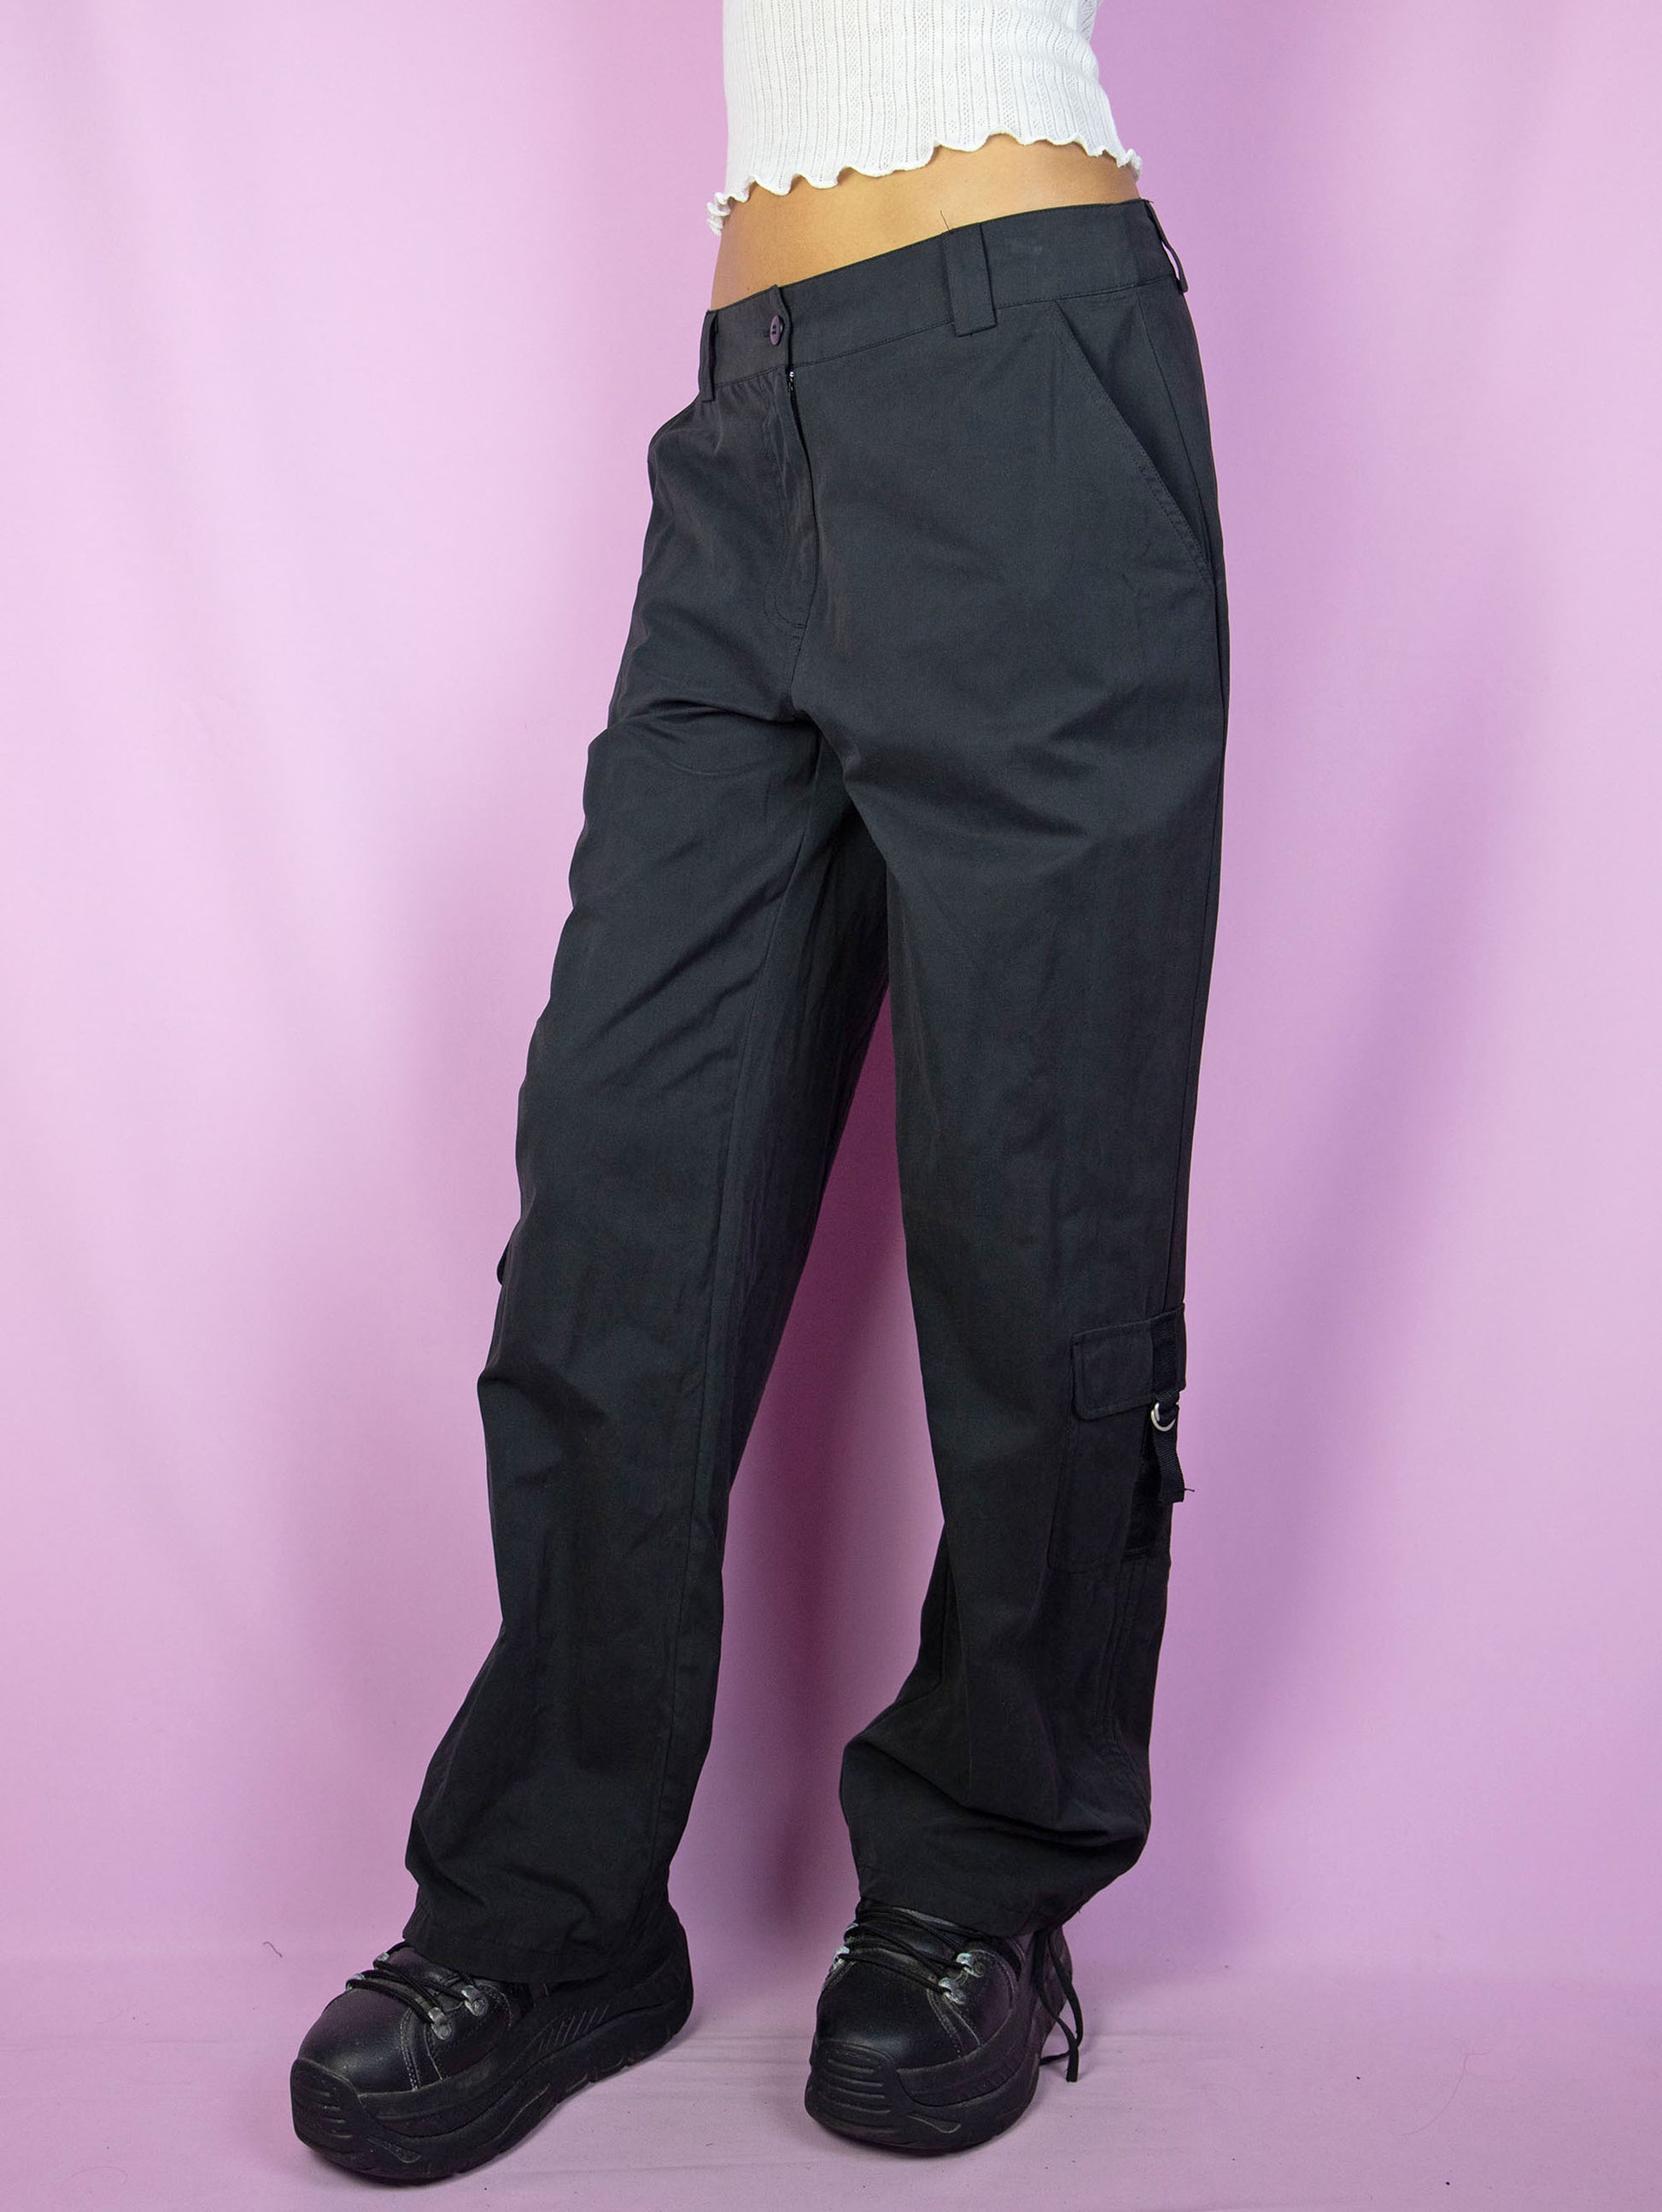 The Y2K Black Cargo Pants are vintage mid-rise wide pants with pockets and a front zipper closure. Cyber grunge 2000s utility trousers.